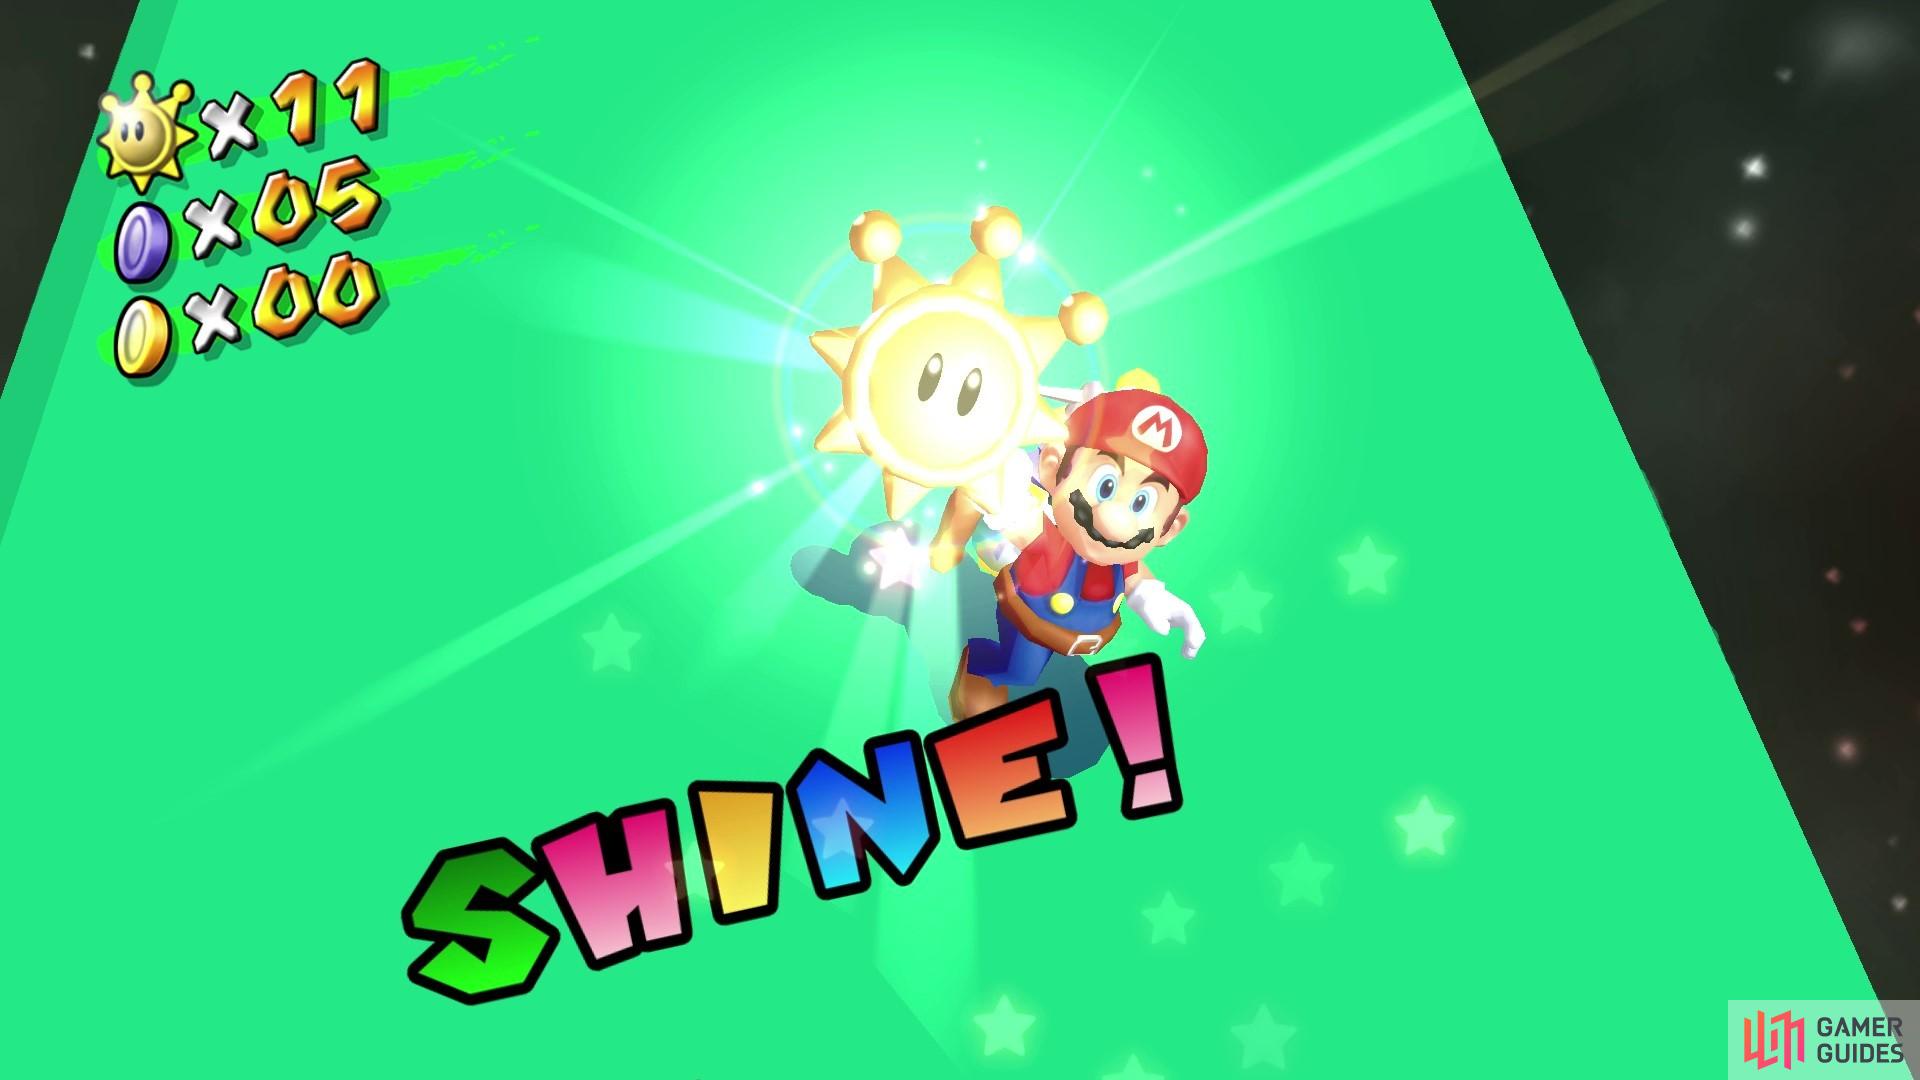 Collecting all red coins within the time frame will earn you a Shine.